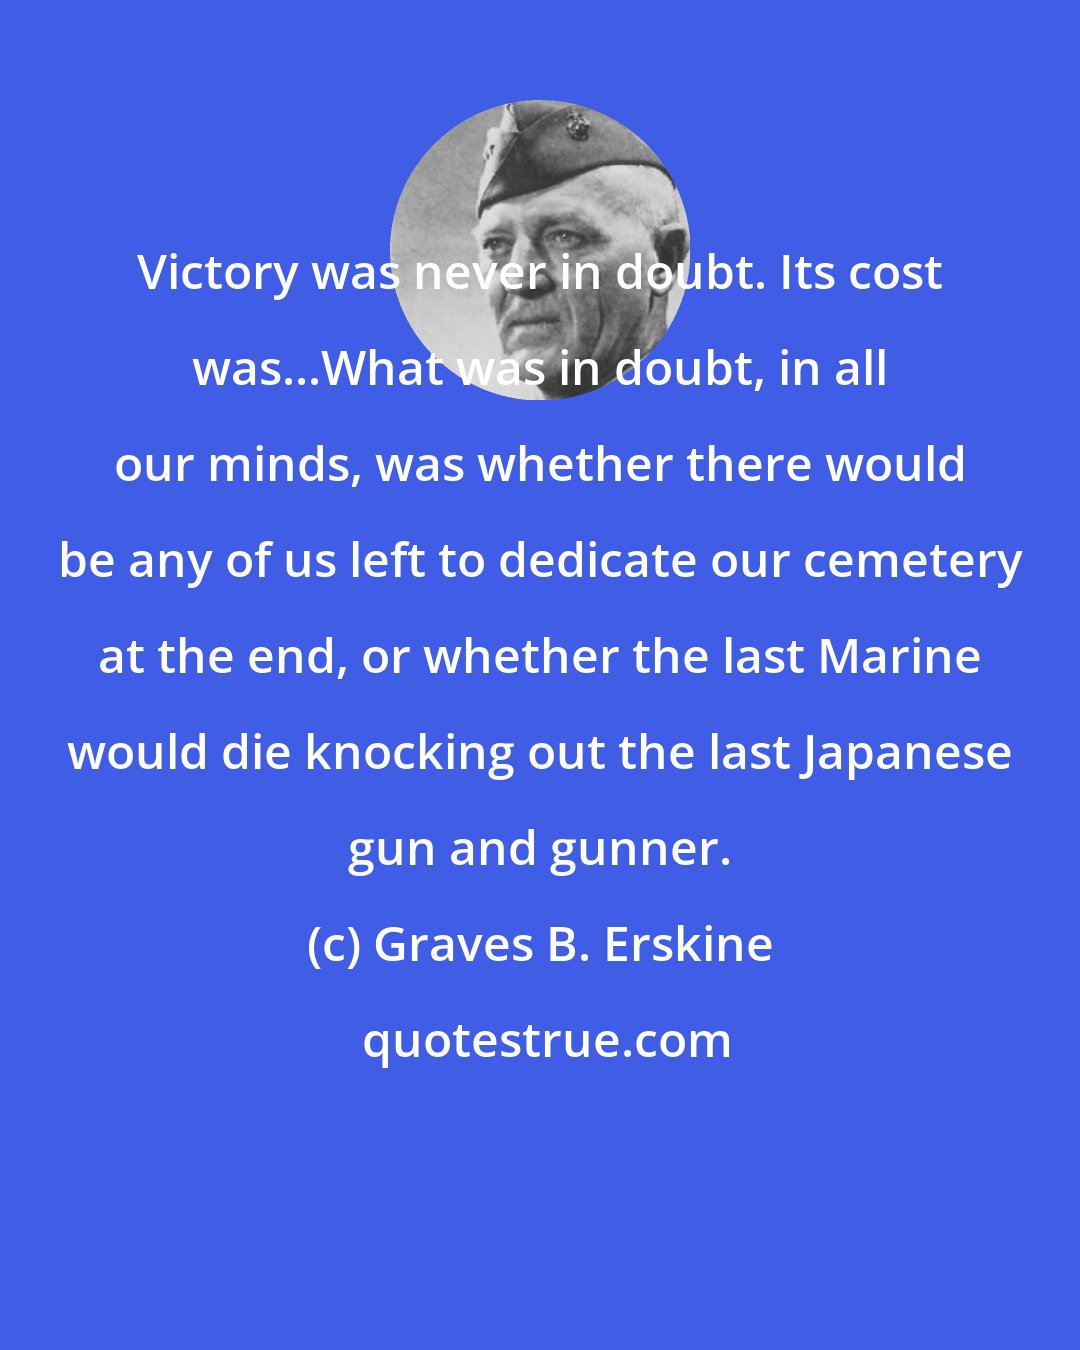 Graves B. Erskine: Victory was never in doubt. Its cost was...What was in doubt, in all our minds, was whether there would be any of us left to dedicate our cemetery at the end, or whether the last Marine would die knocking out the last Japanese gun and gunner.